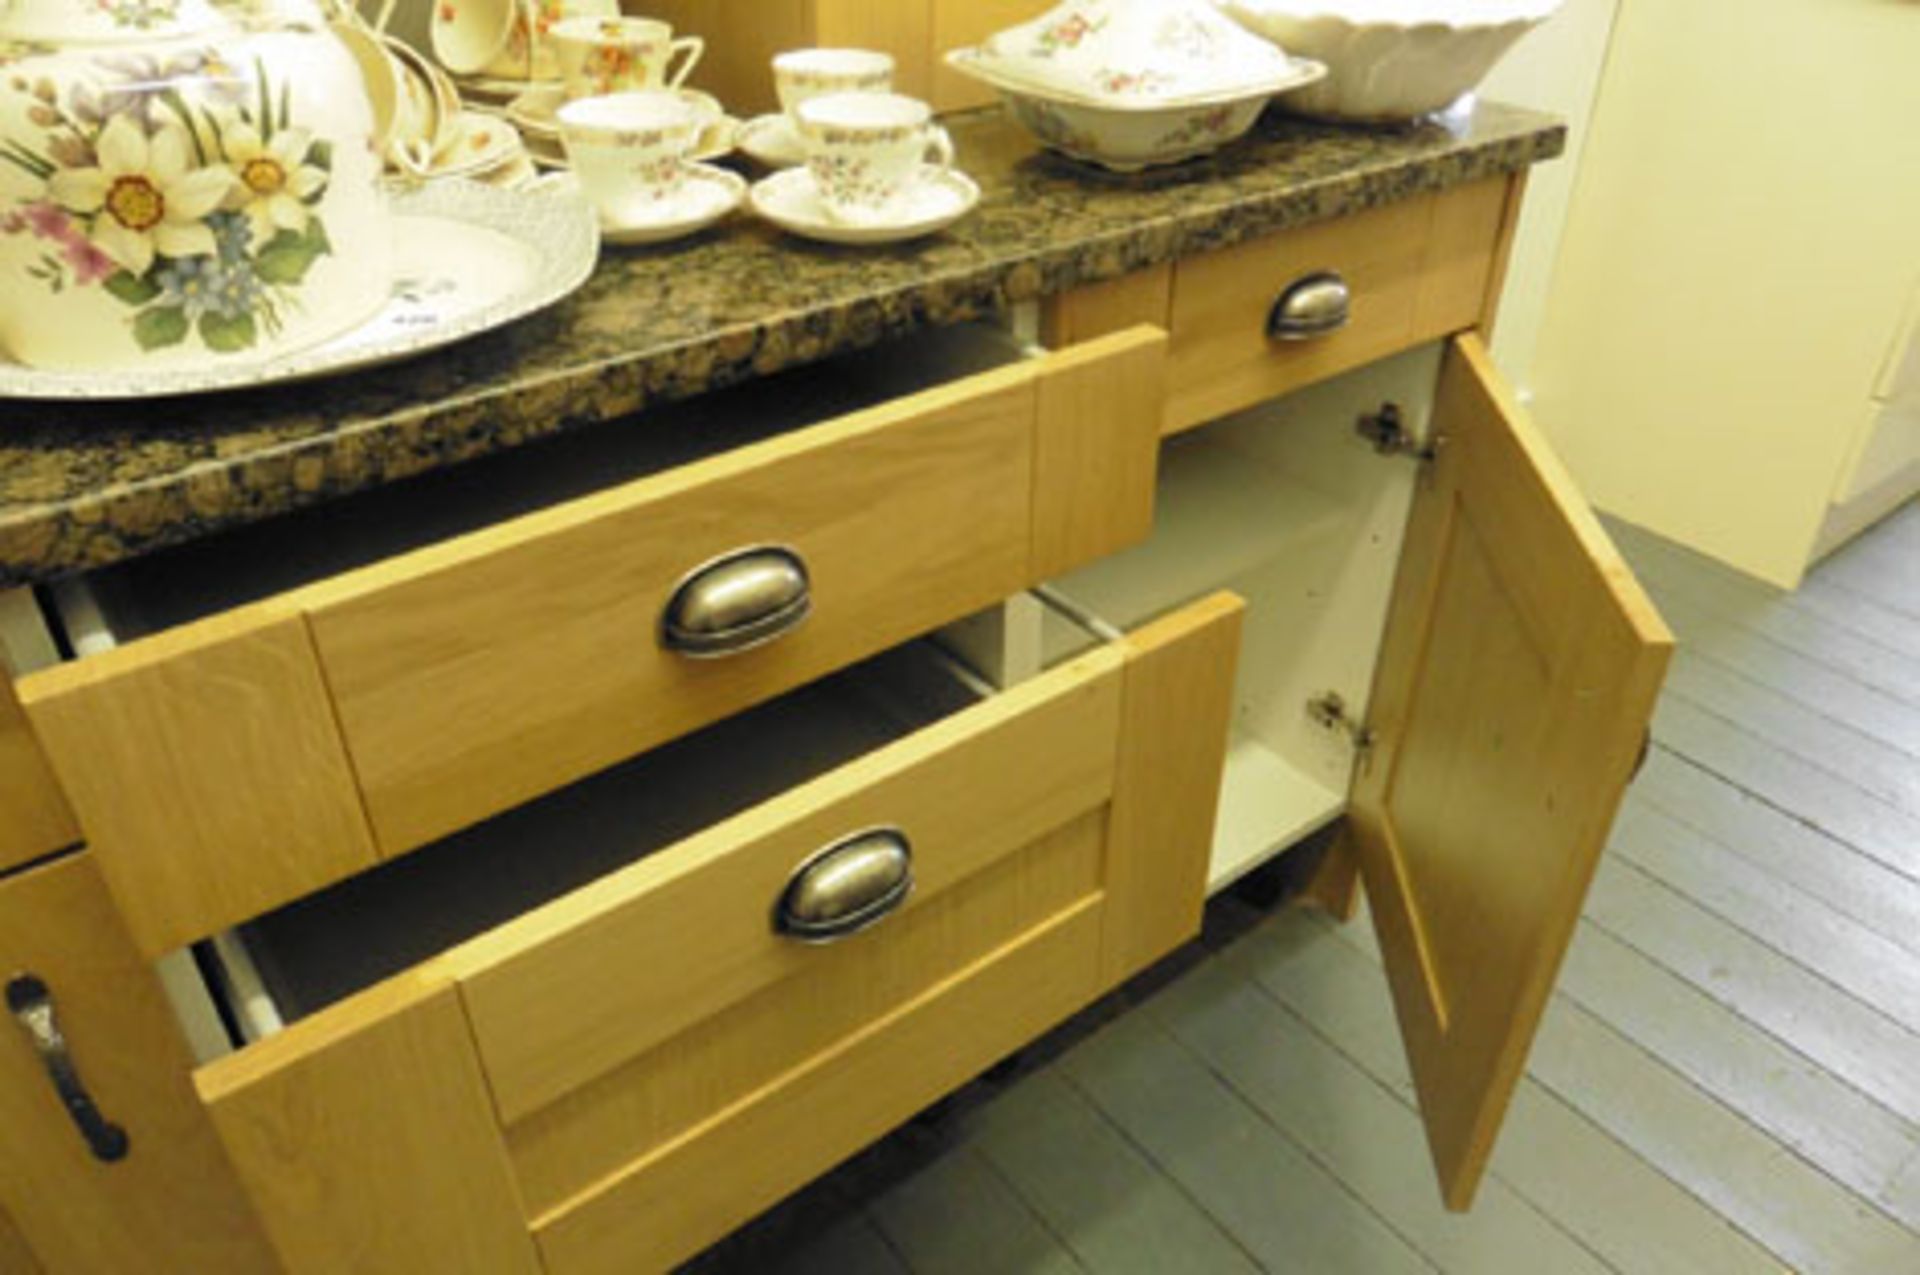 Oak shaker-style kitchen display with a quartz worktop and soft-closer drawers, width approximately: - Image 2 of 3